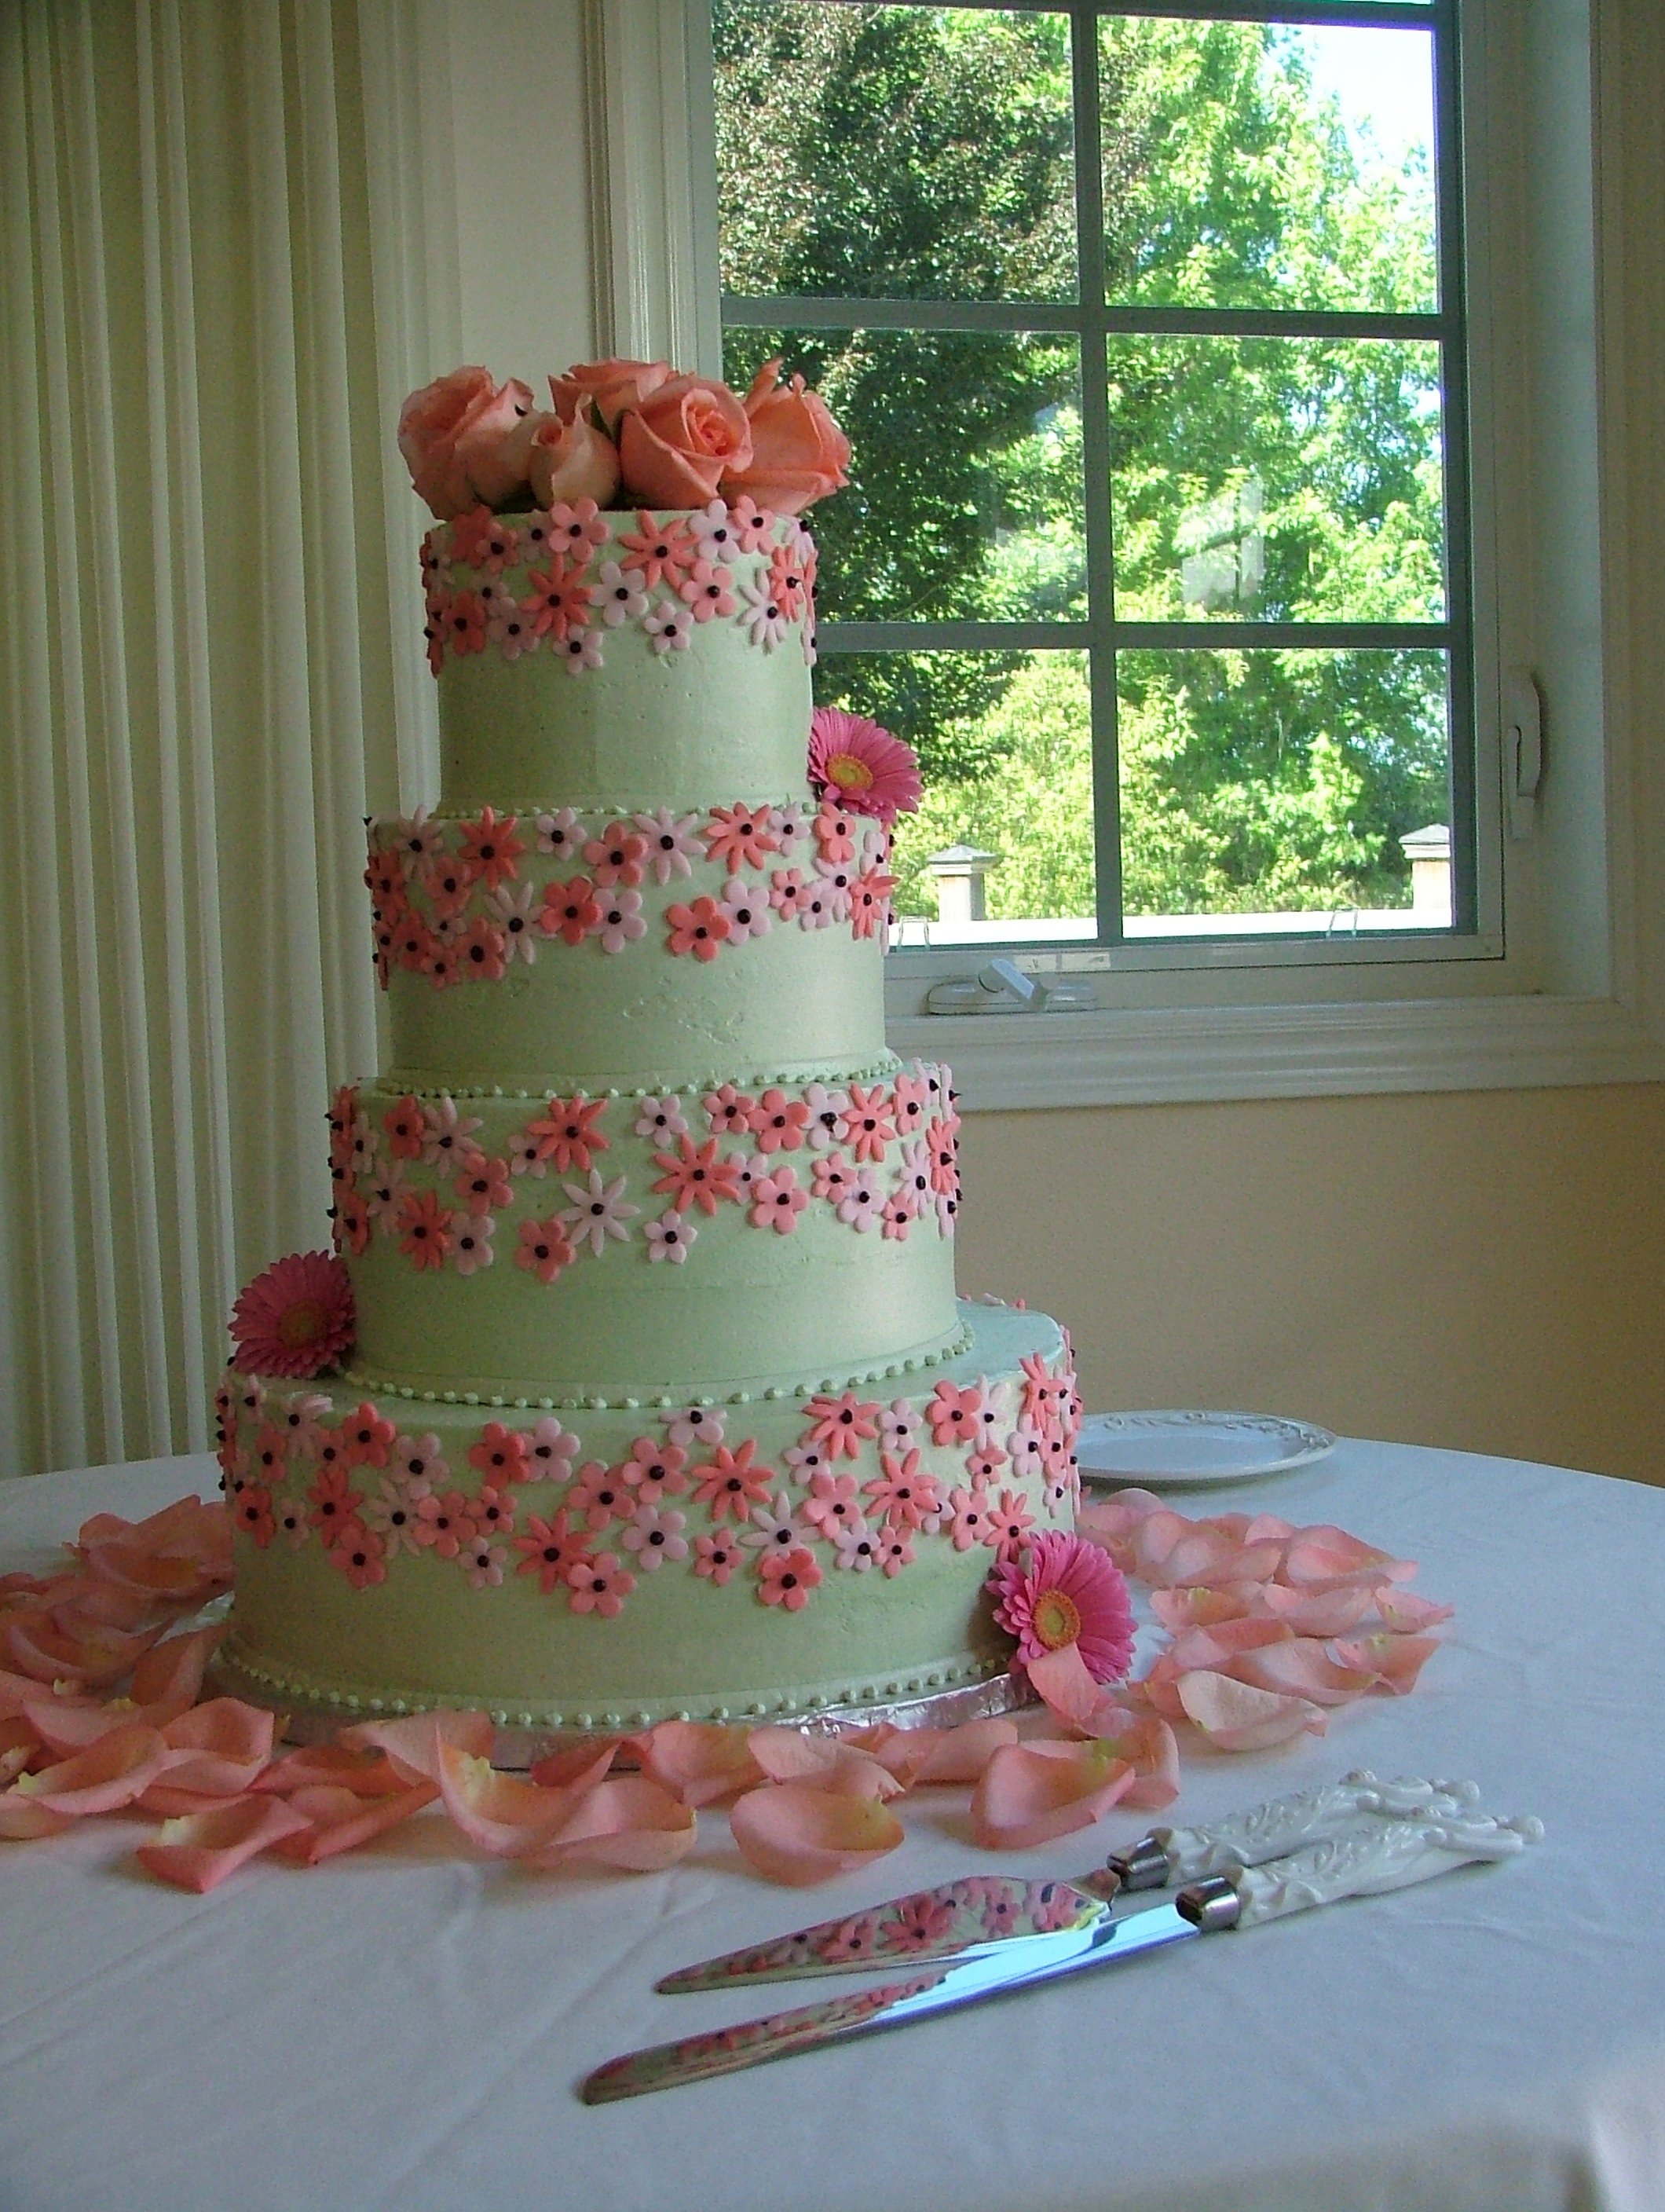 It's All About The Pink - Pink Wedding Cakes That Is